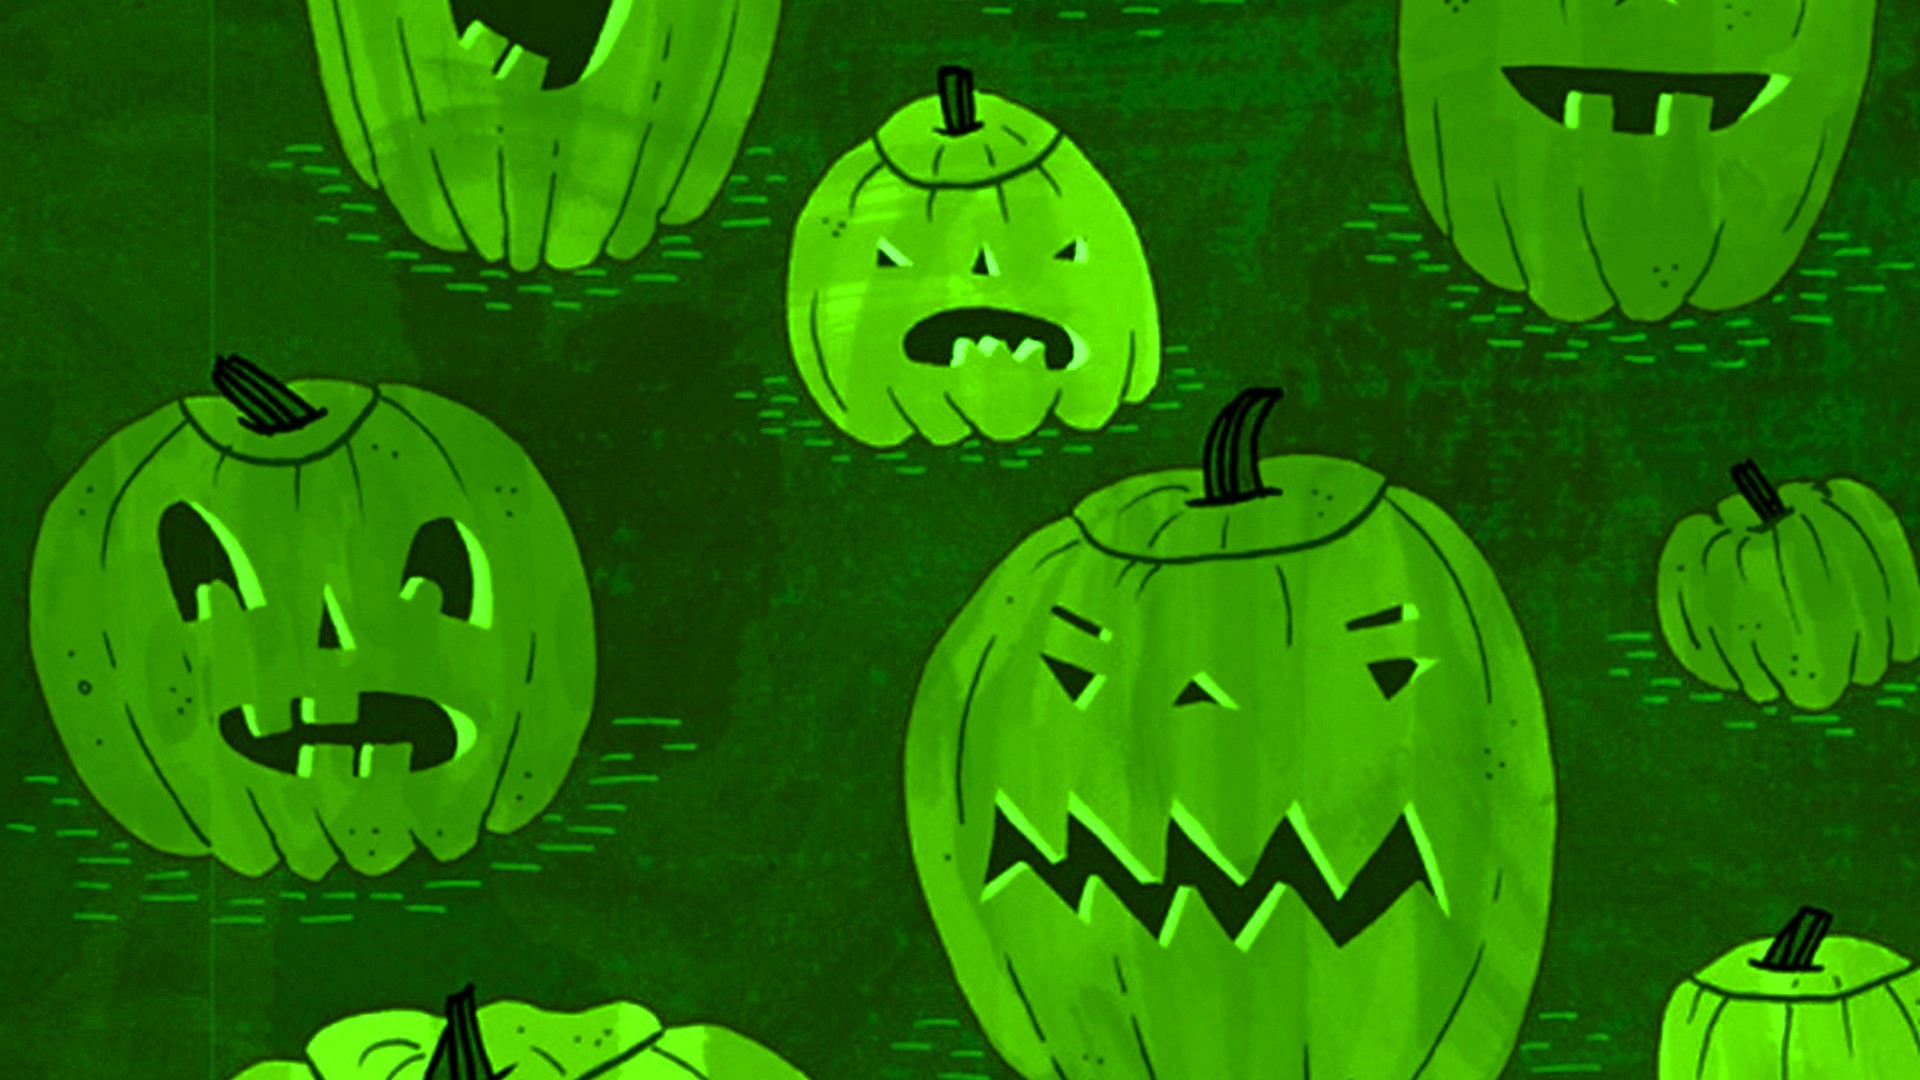 Cute Halloween Desktop Wallpaper with high-resolution 1920x1080 pixel. You can use this wallpaper for your Windows and Mac OS computers as well as your Android and iPhone smartphones